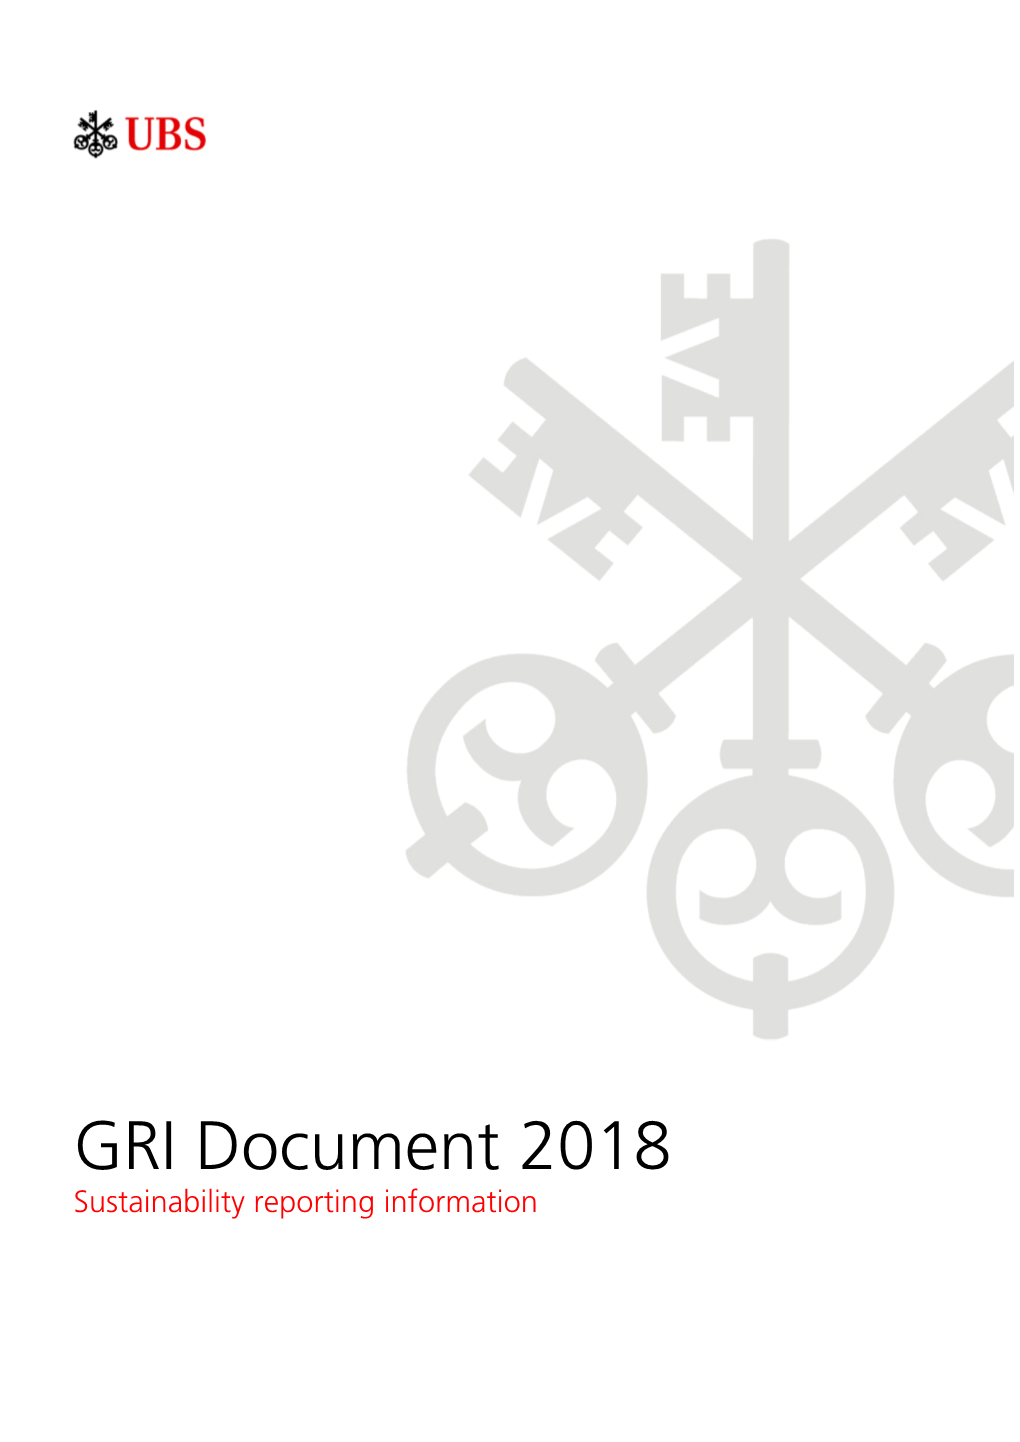 GRI Document 2018 Sustainability Reporting Information